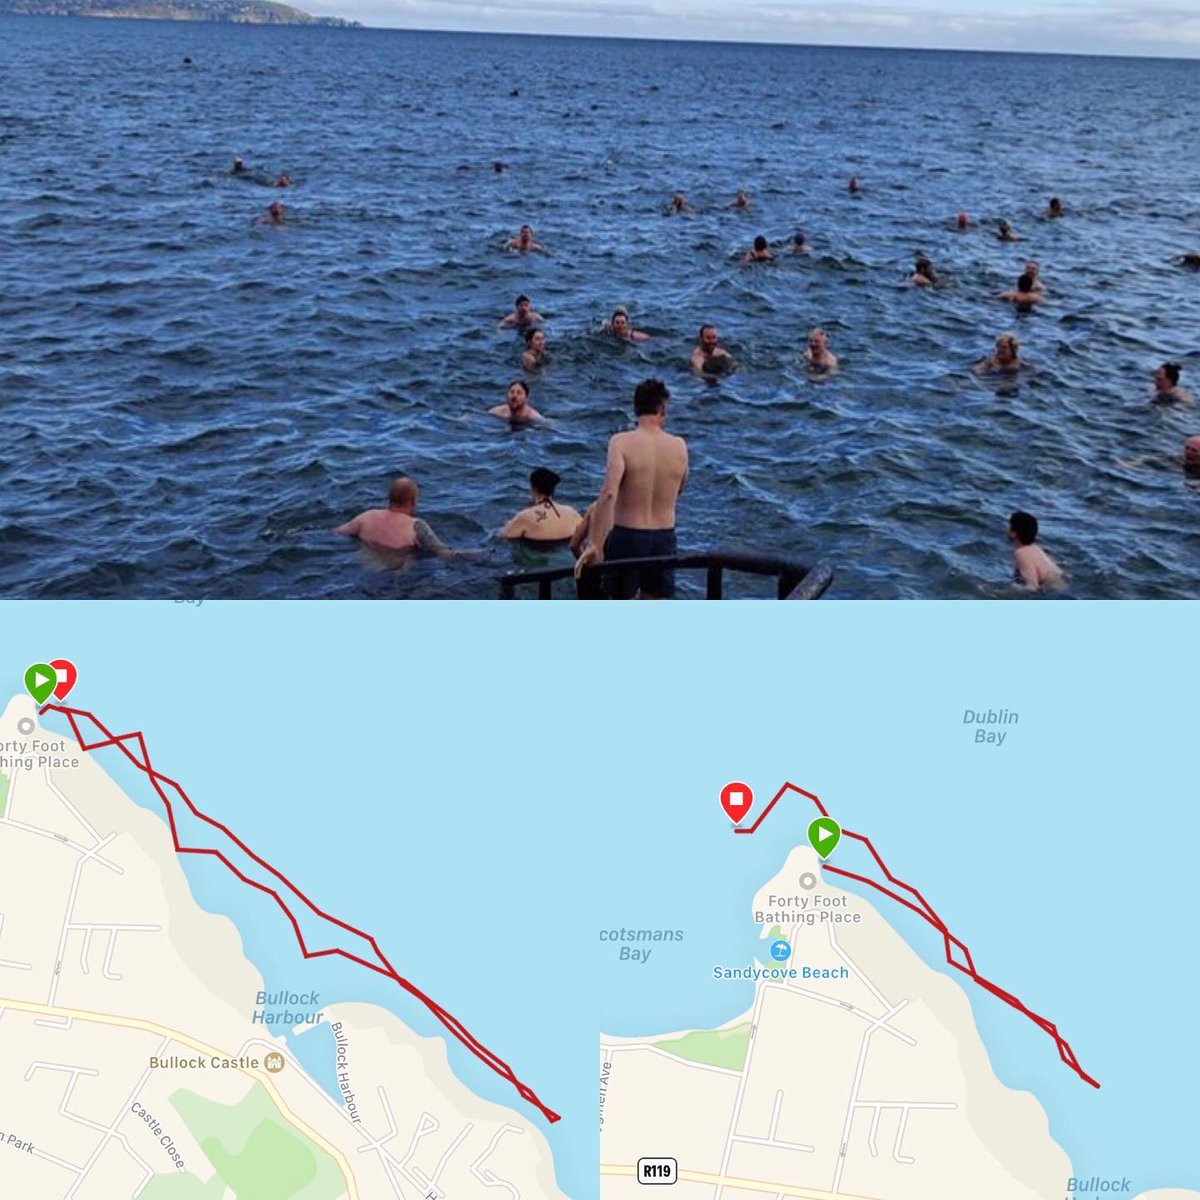 18 walruses for training this morning 🤩 , all swimming levels  from 2k , 1k, 500m pods 💕 water temp 12.6c Air 11c #40footwalrus #fortyfootdublin #winterswimmingdublin #wildswimmingireland #freeswimsdublin #winterswimmingireland #irishseaswimmers #dublincoldwaterswimming